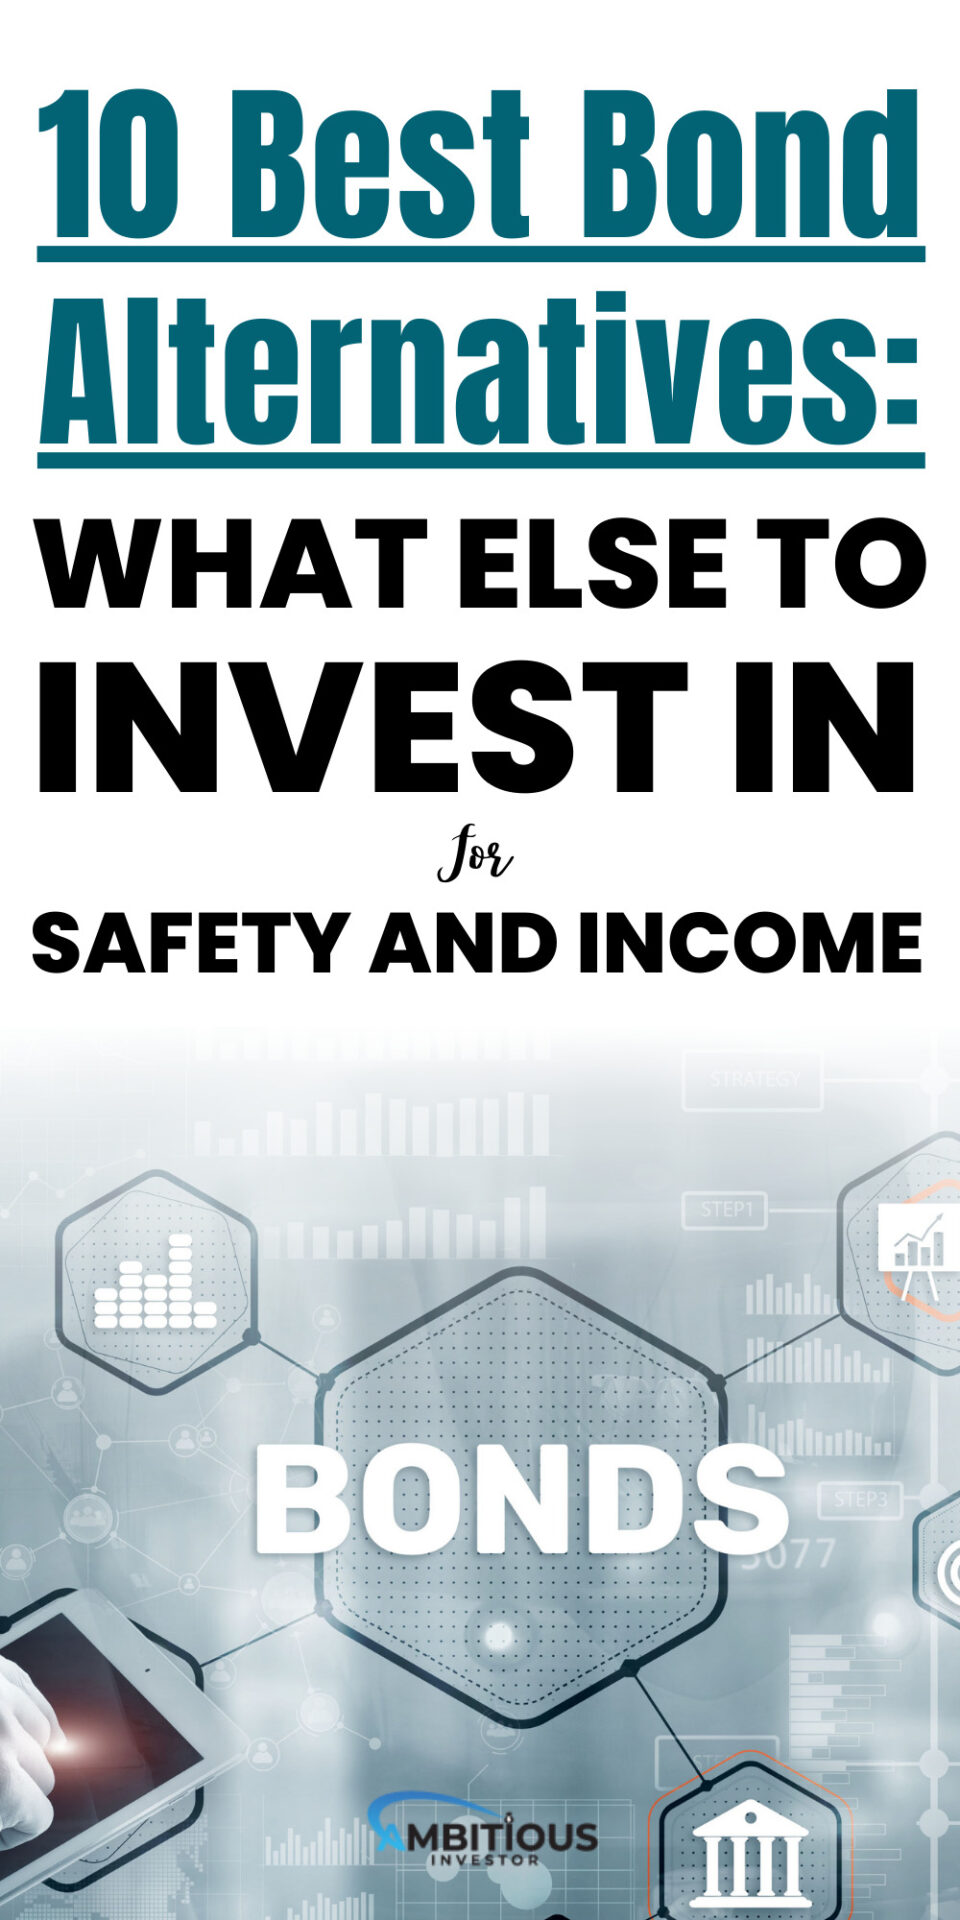 10 Best Bond Alternatives: What Else to Invest in For Safety and Income